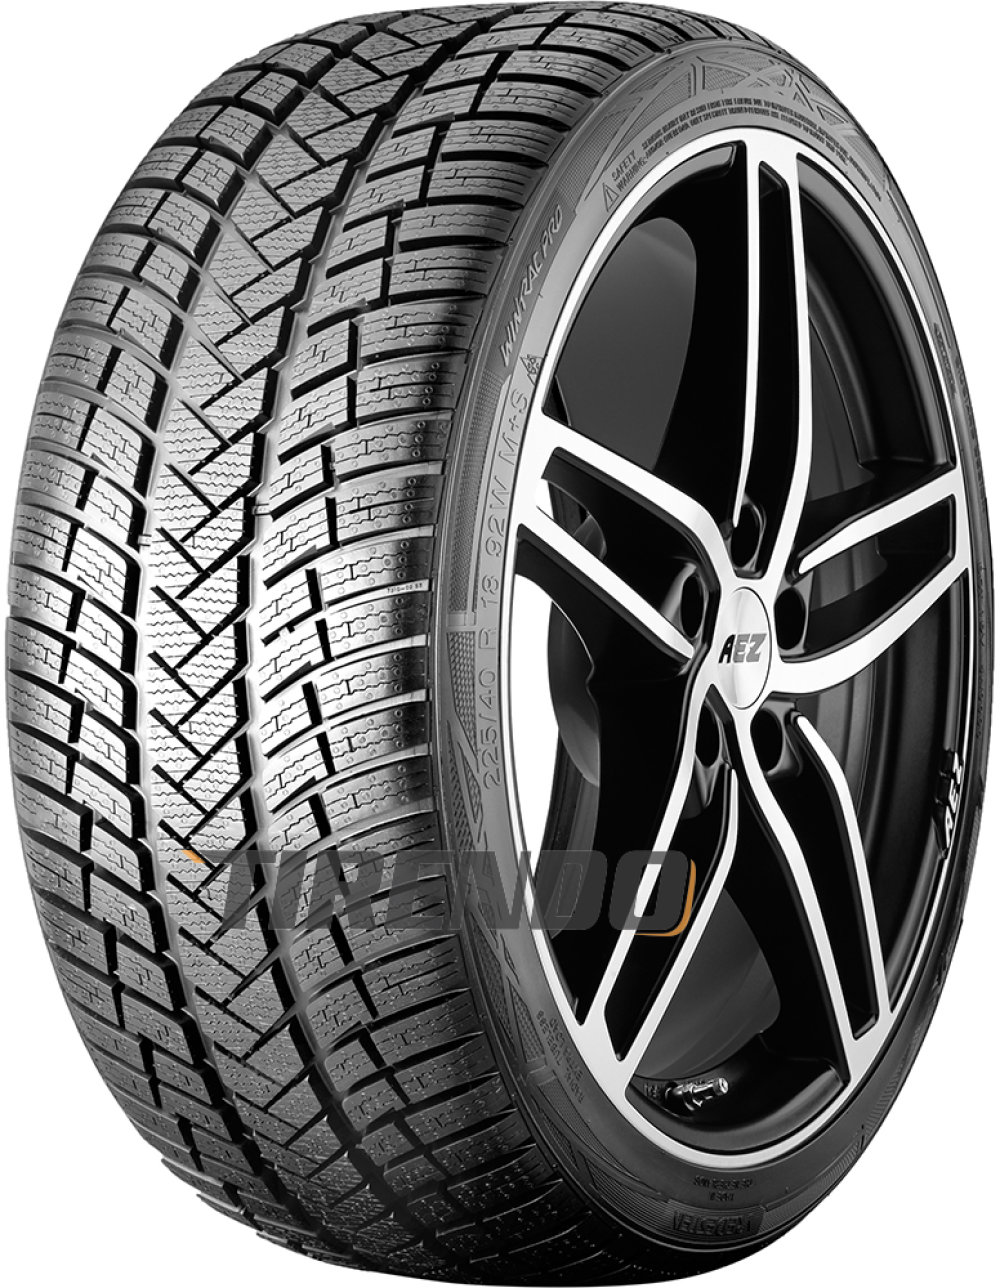 Image of Vredestein Wintrac Pro ( 275/45 R20 110V XL )